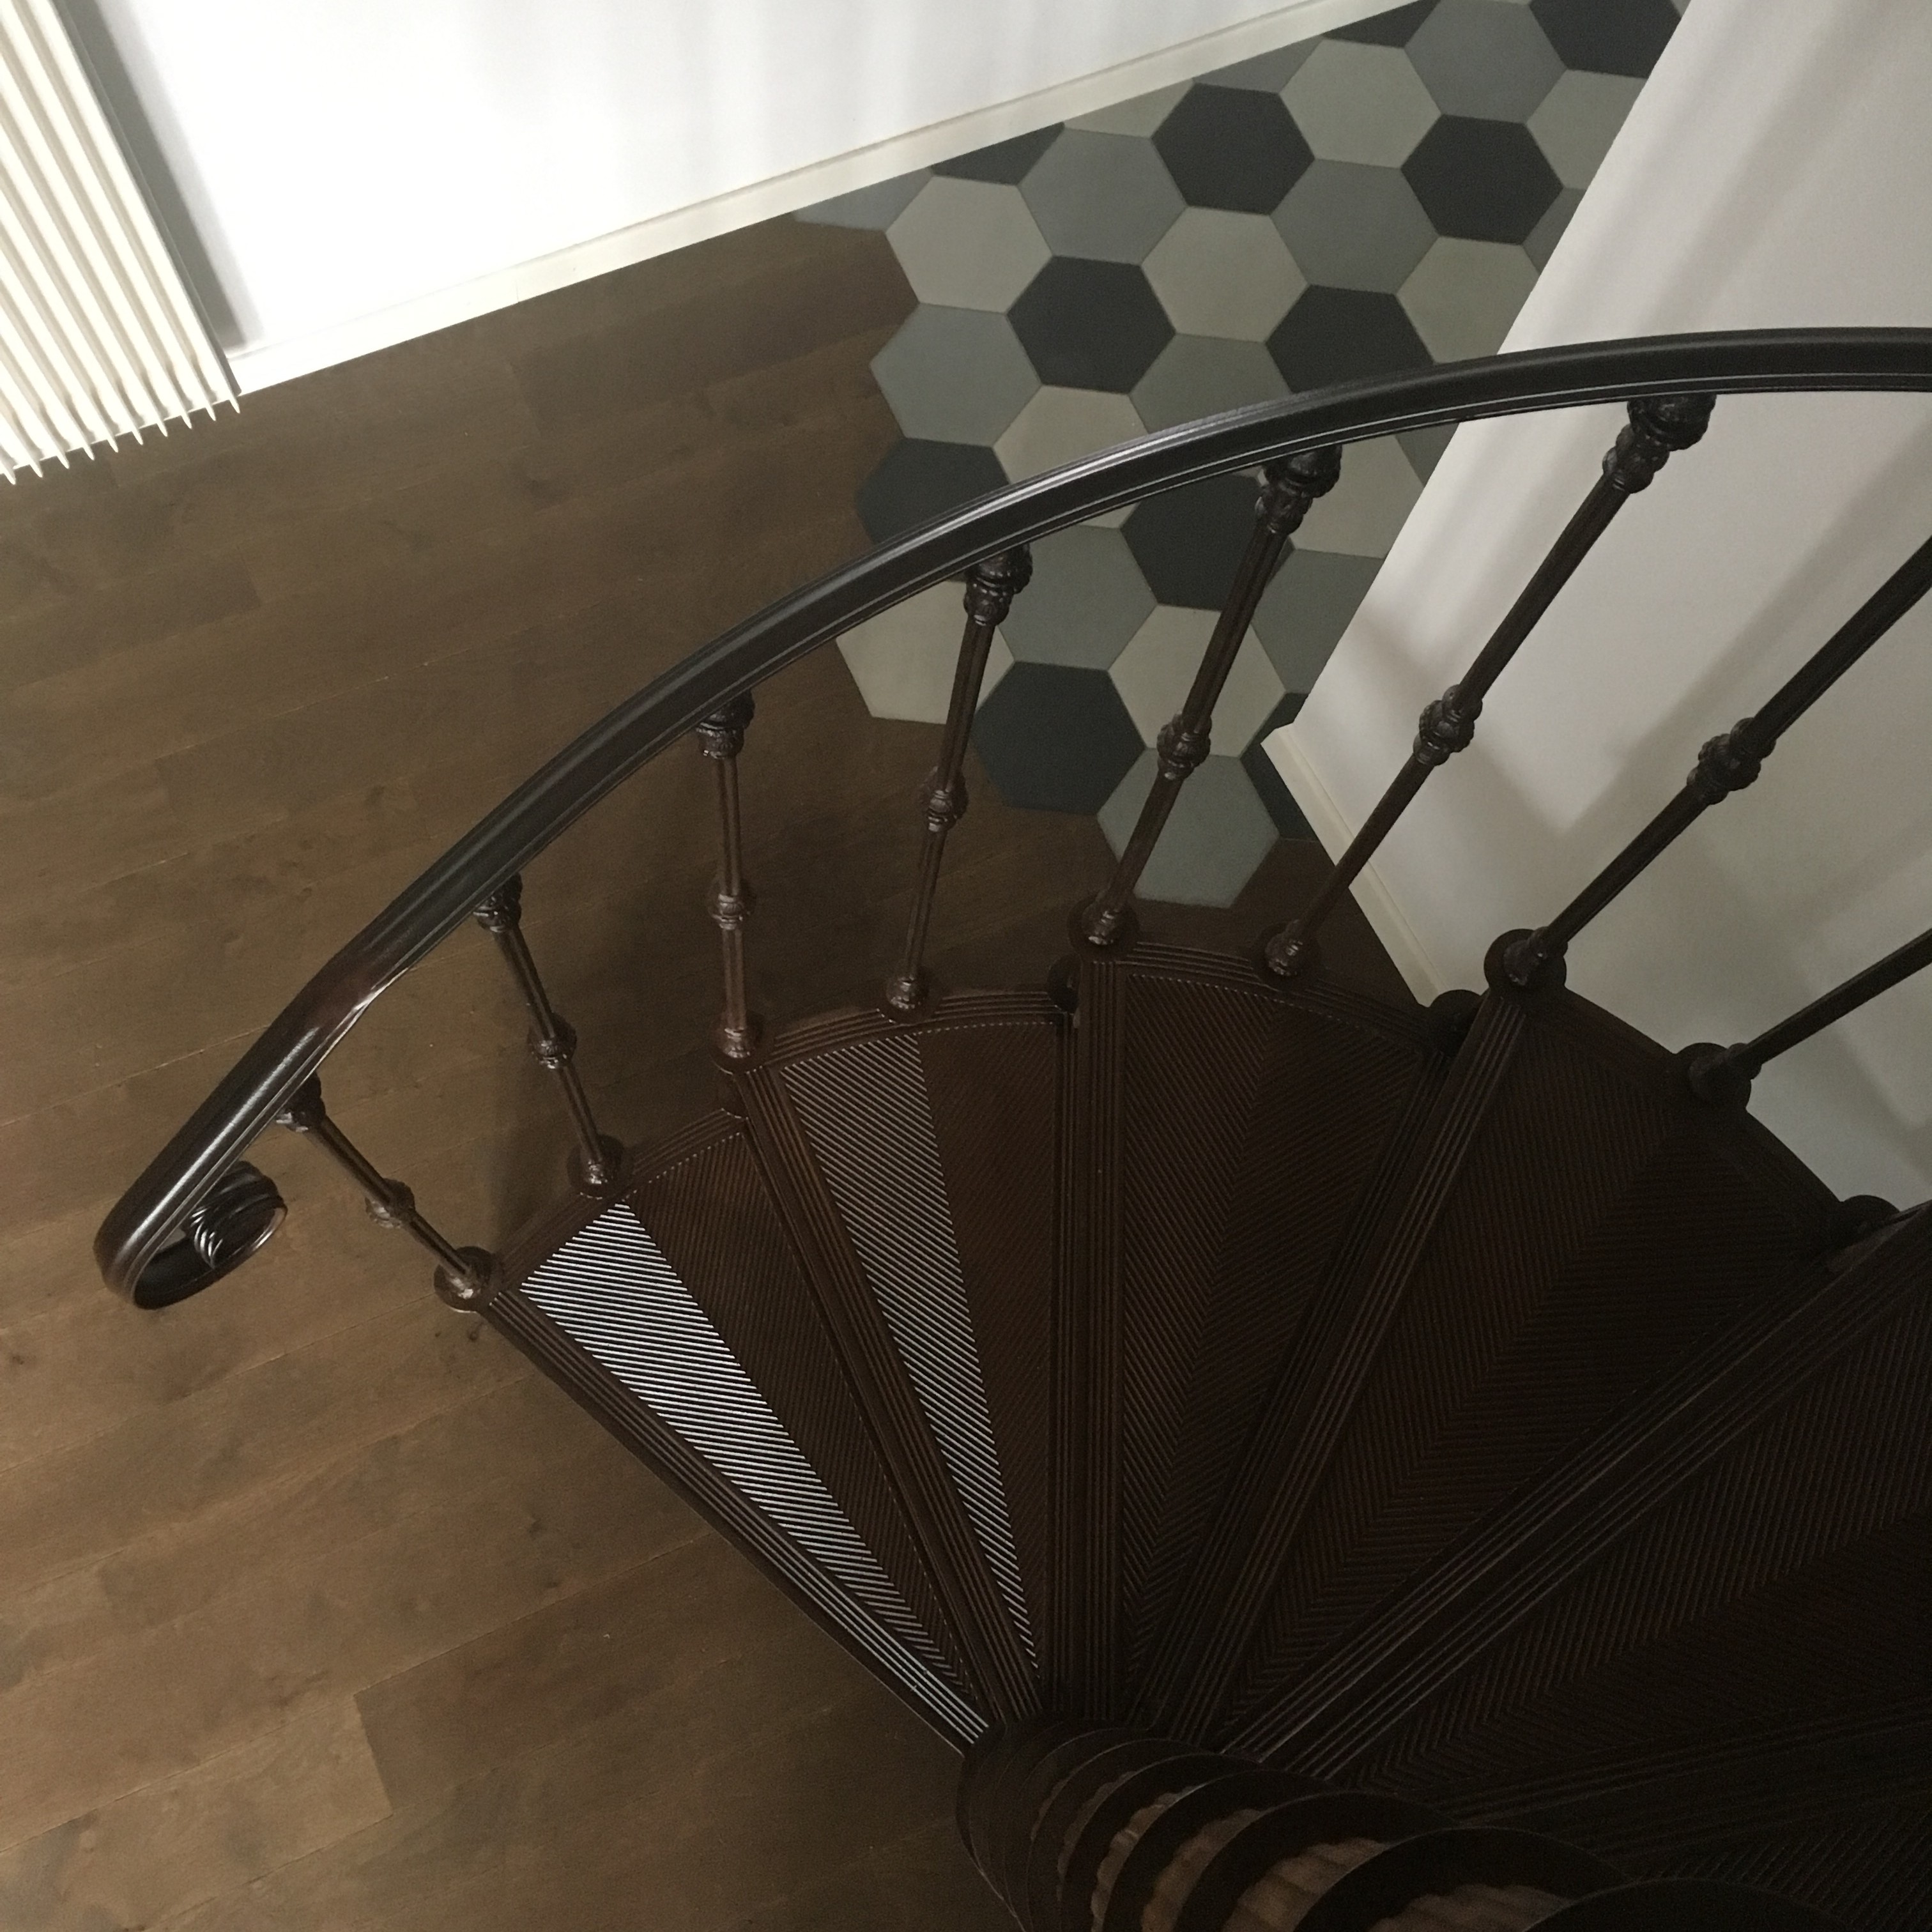 Cast iron spiral staircase model Reims in a rusty varnish finish